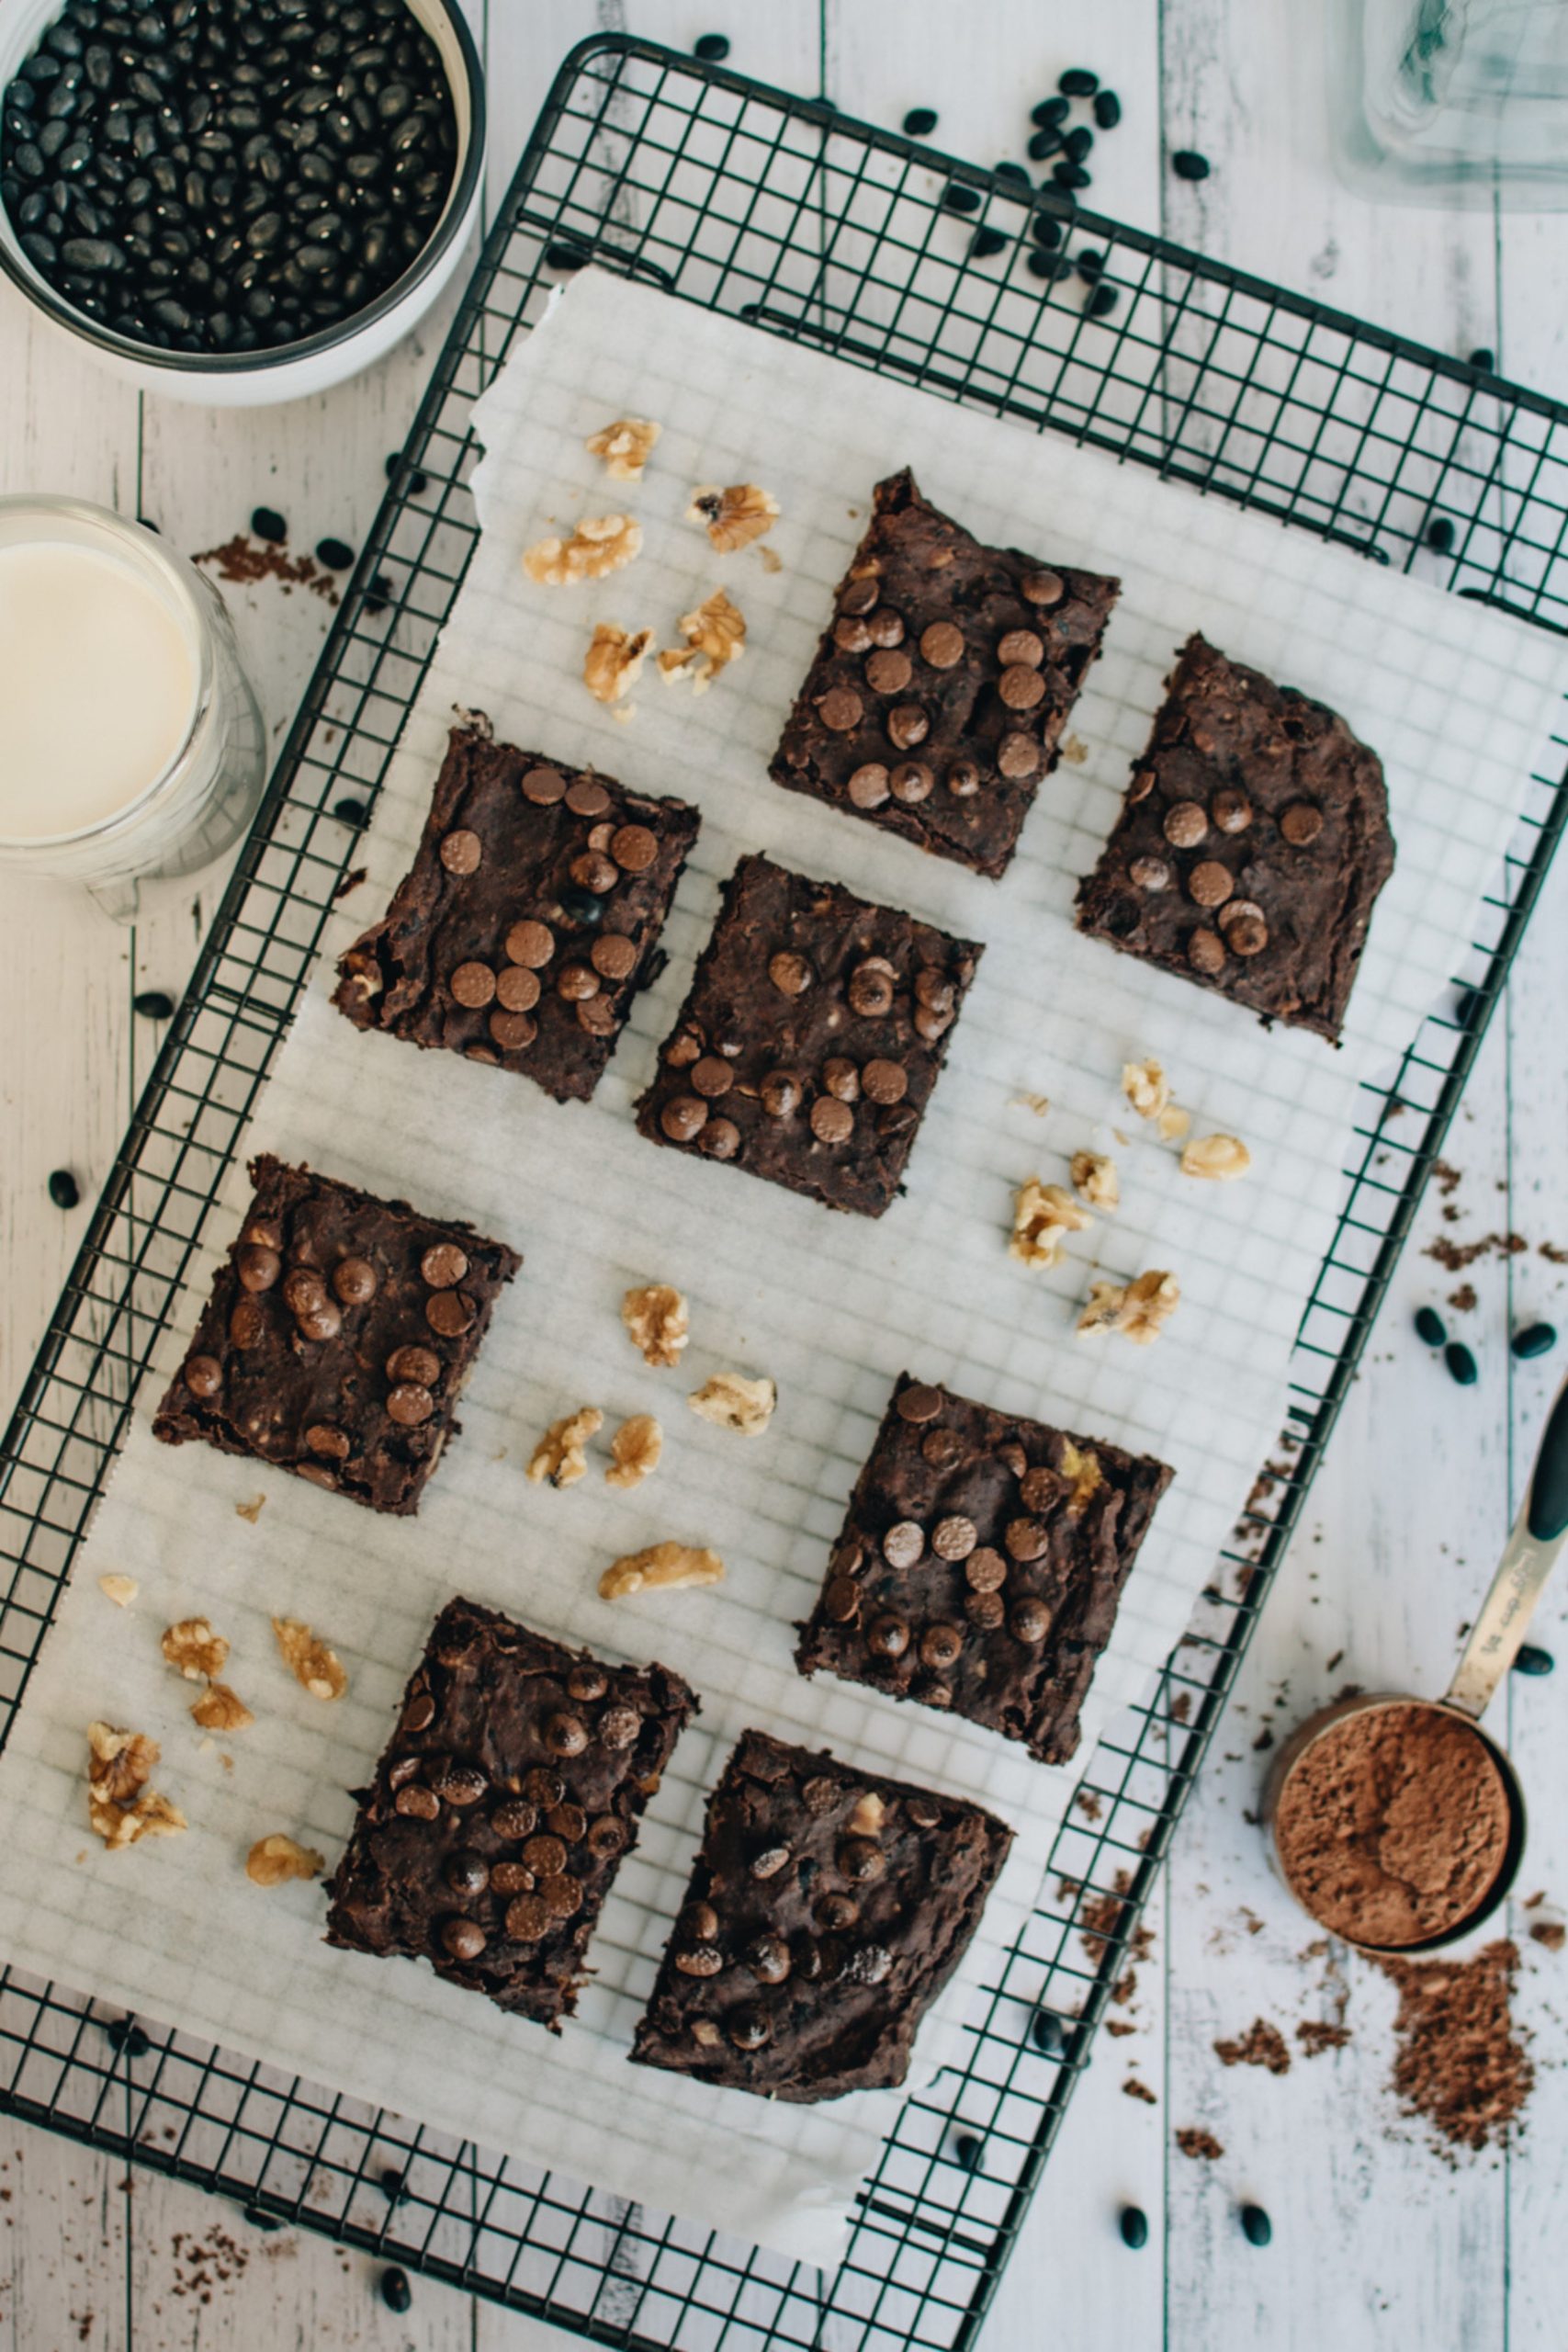 This Vegan Black Bean Brownies recipe is easy to make, healthy, and super delicious. Made in a food processor clean-up is a breeze. This Gluten-Free Black Bean Brownies recipe only needs 10 minutes to prep!